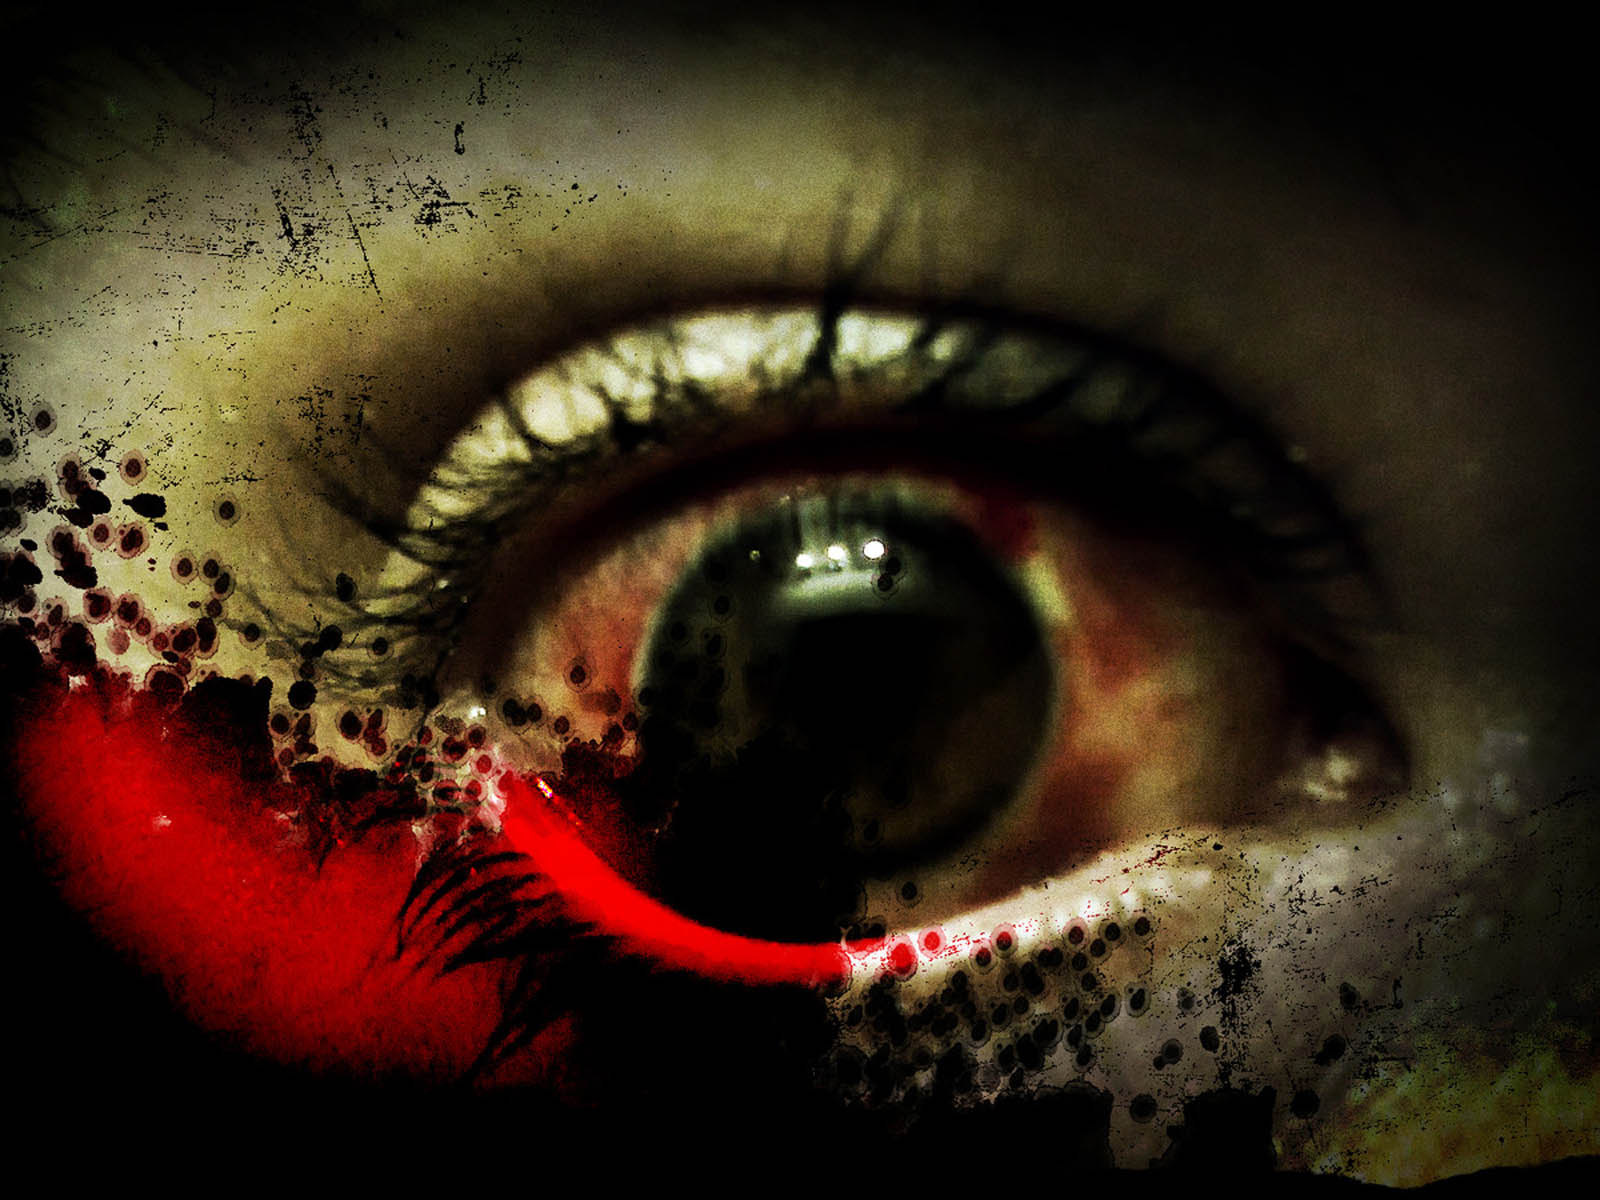 Scary Live Wallpapers For Pc - Eye Horror Wallpaper Hd - 1600x1200 Wallpaper  